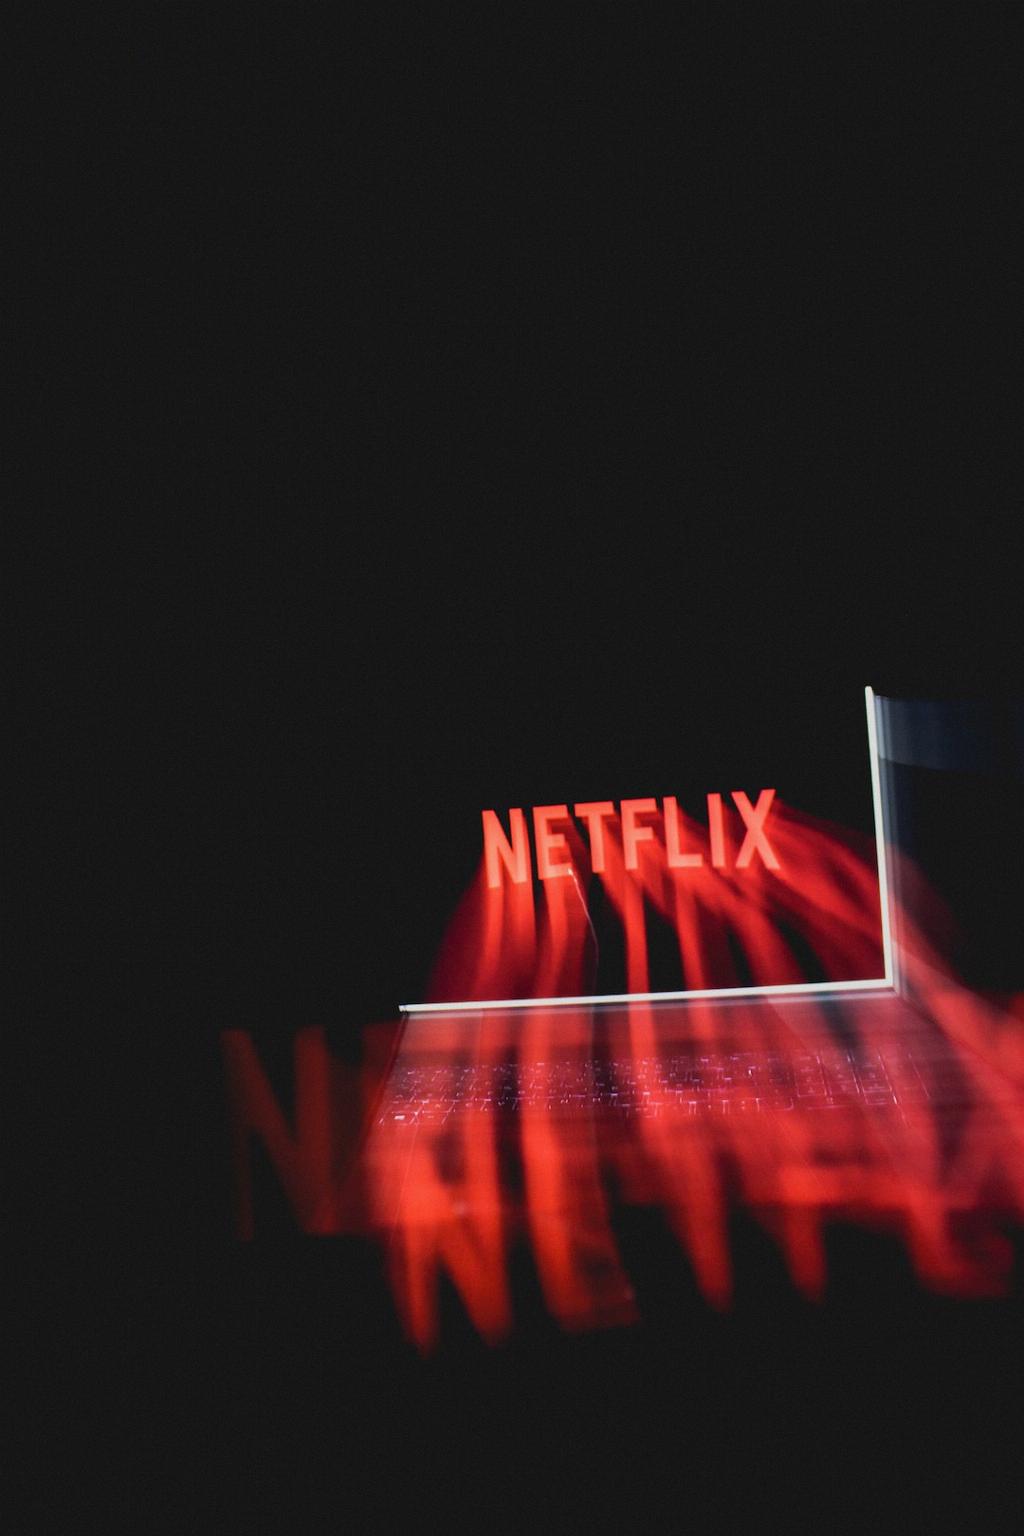 How Much Is Netflix Monthly Subscription?